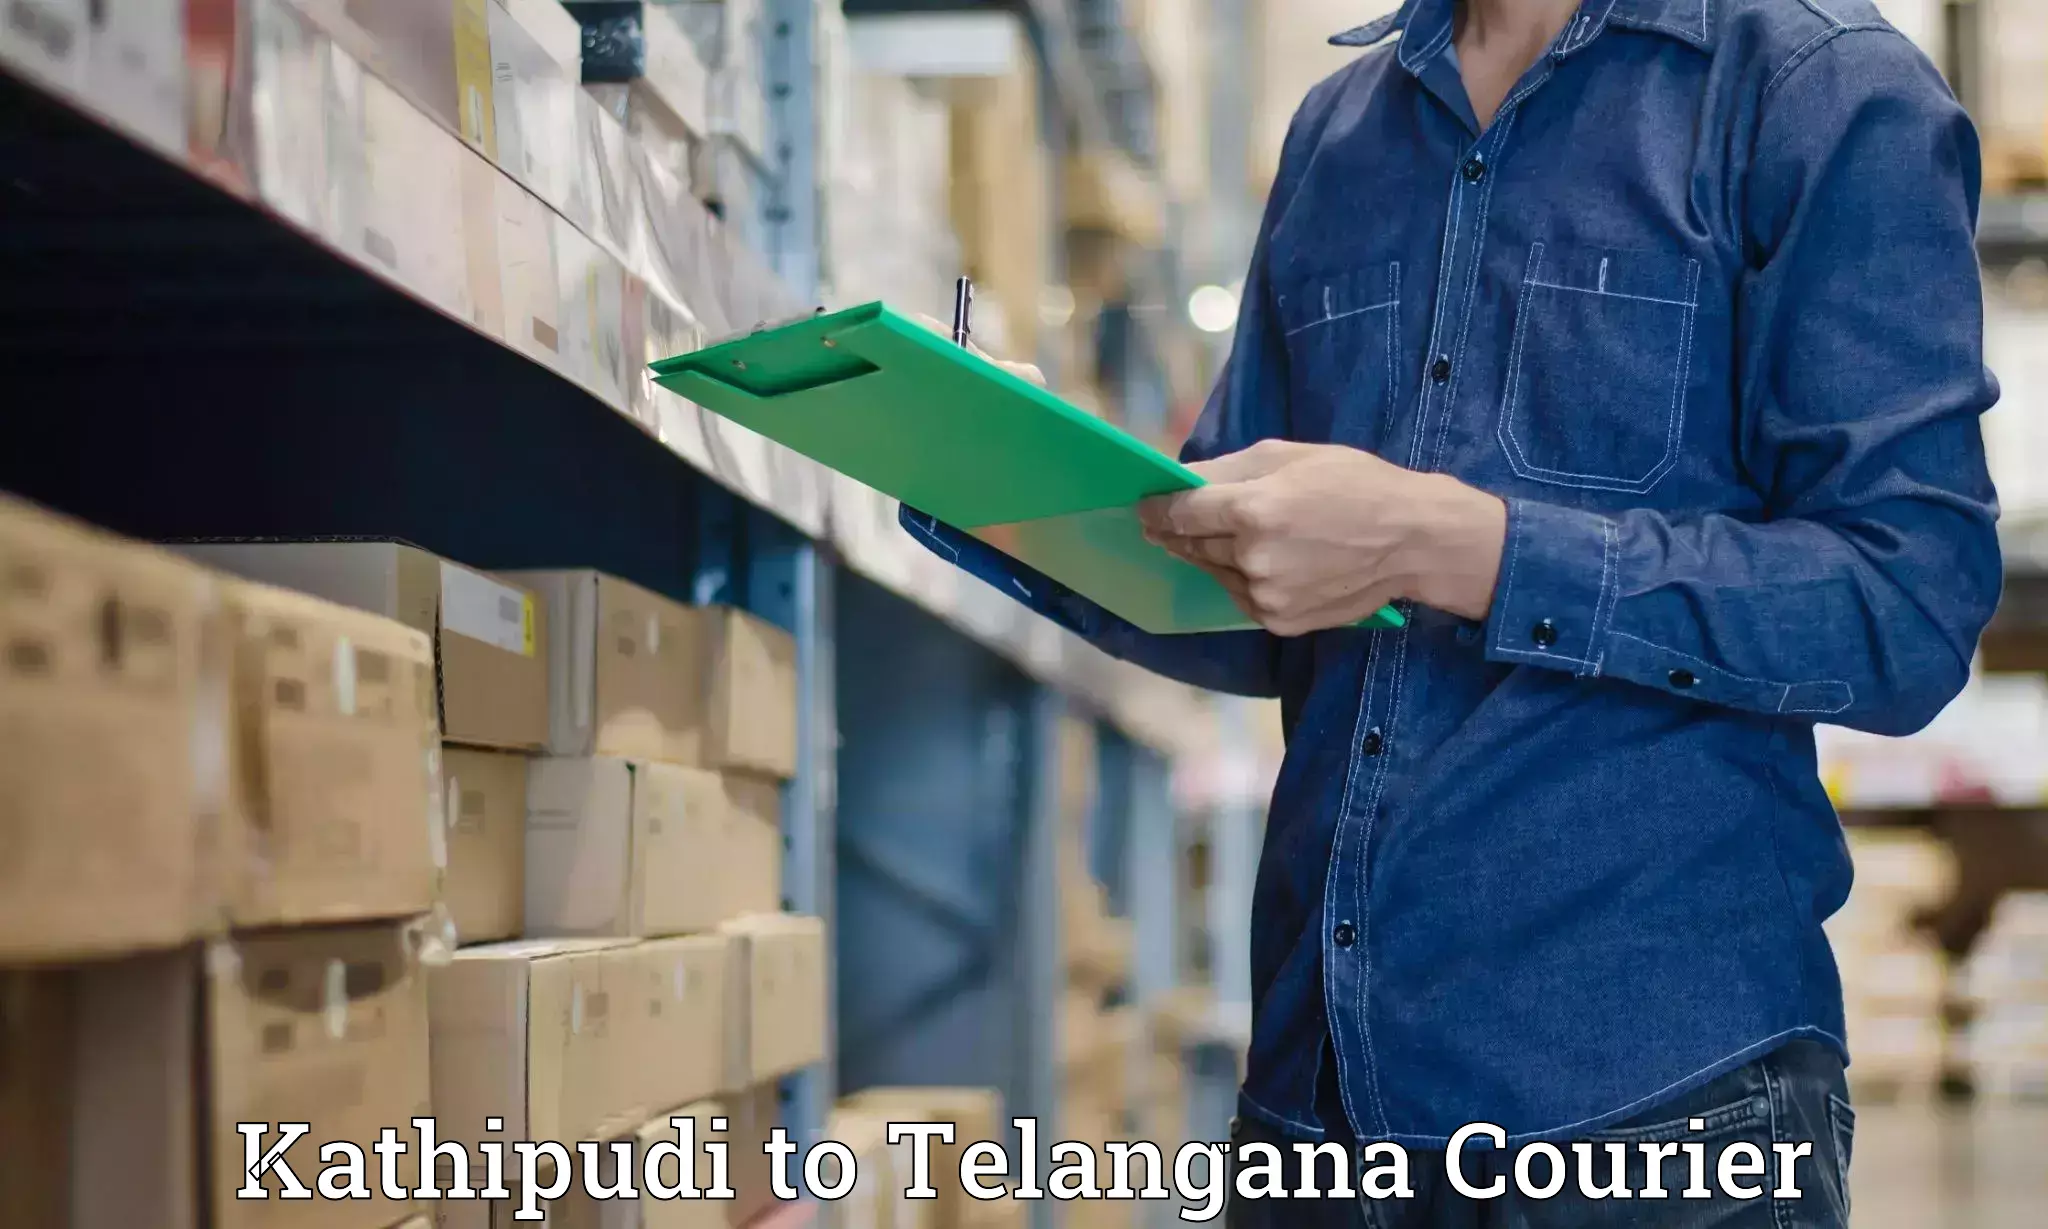 Professional delivery solutions Kathipudi to Gangadhara